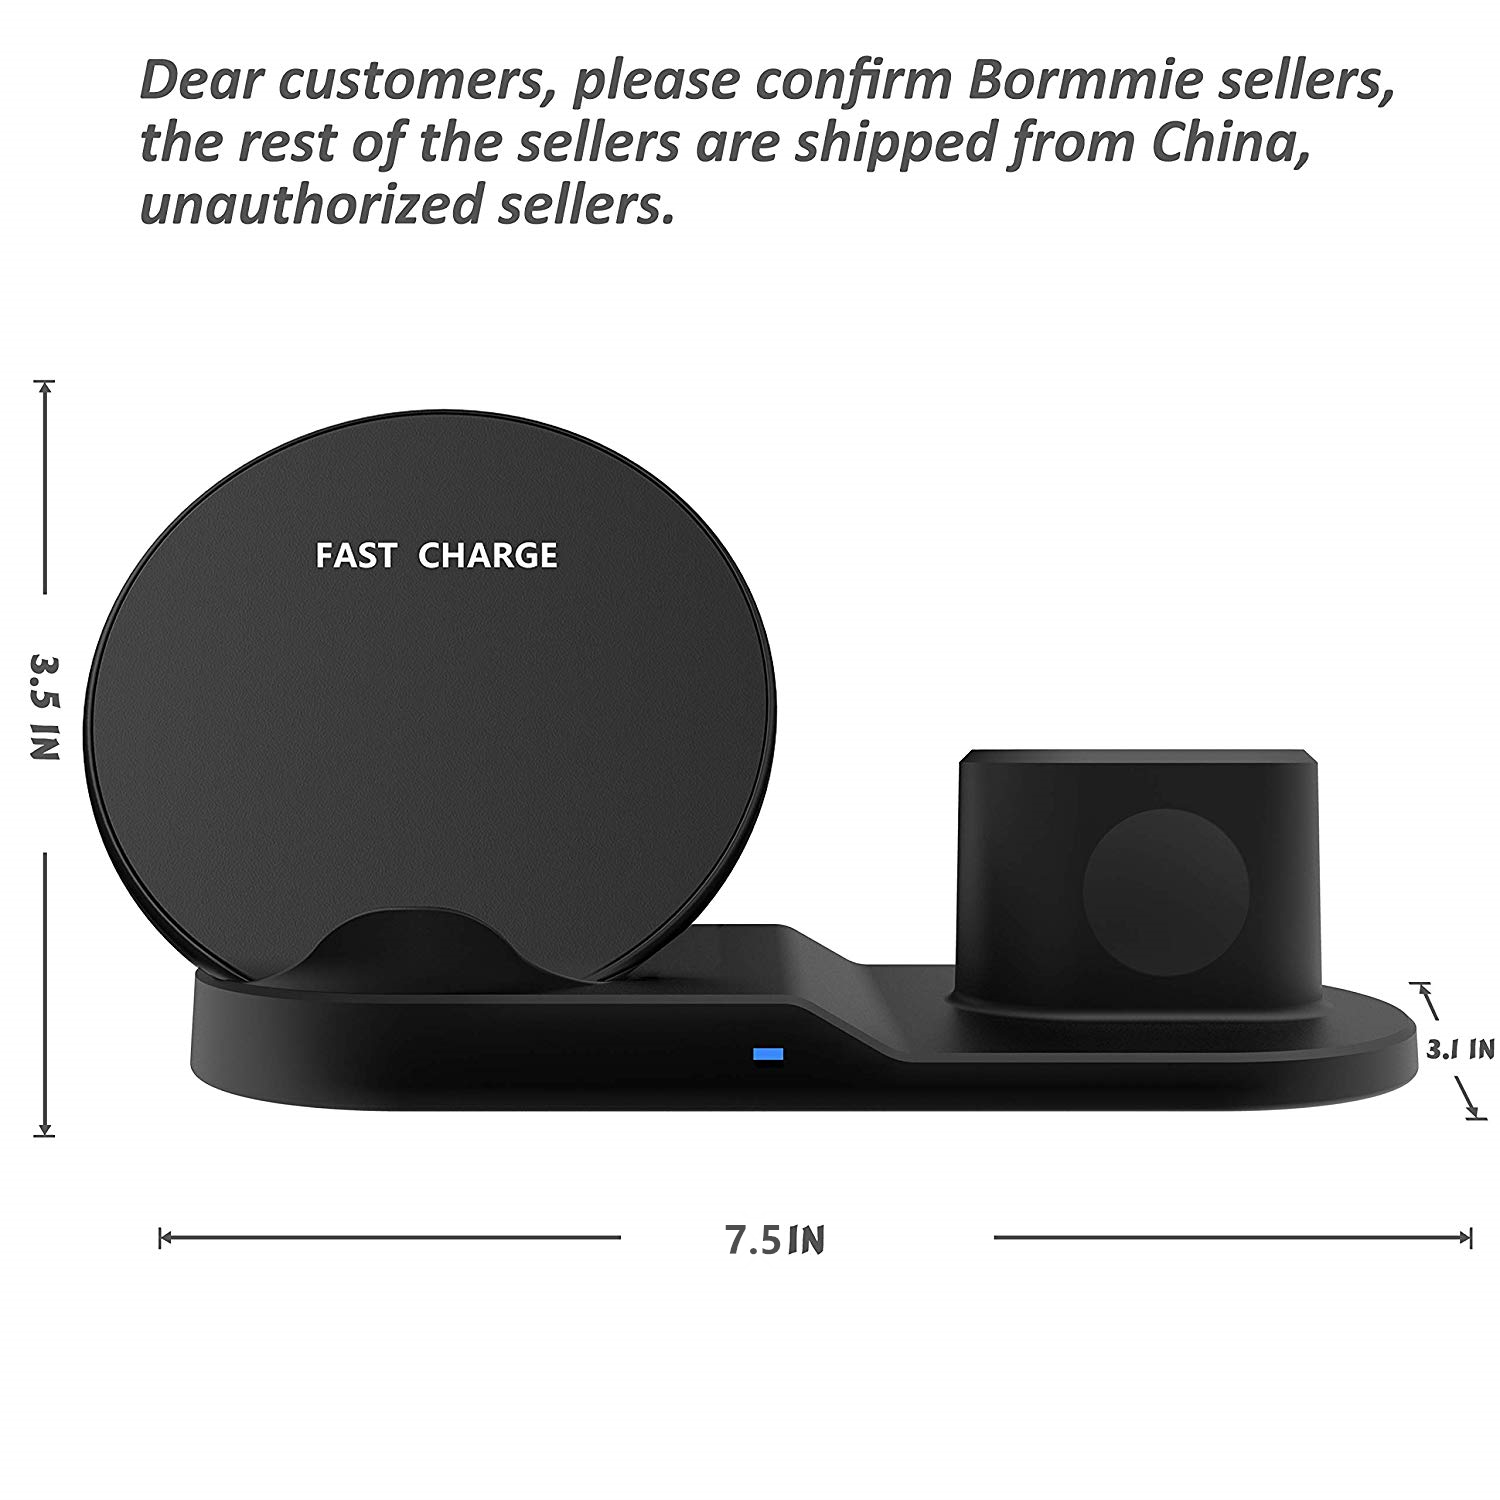 Wireless Charging Stand for Apple Watch Series 3/2/1, Charging stand for AirPods,3 in1 wireless charger stand for iPhone Xs/XS MAX/XR/X/8/8 Plus,Sumsung and all other QI-Enable Devices - image 4 of 8